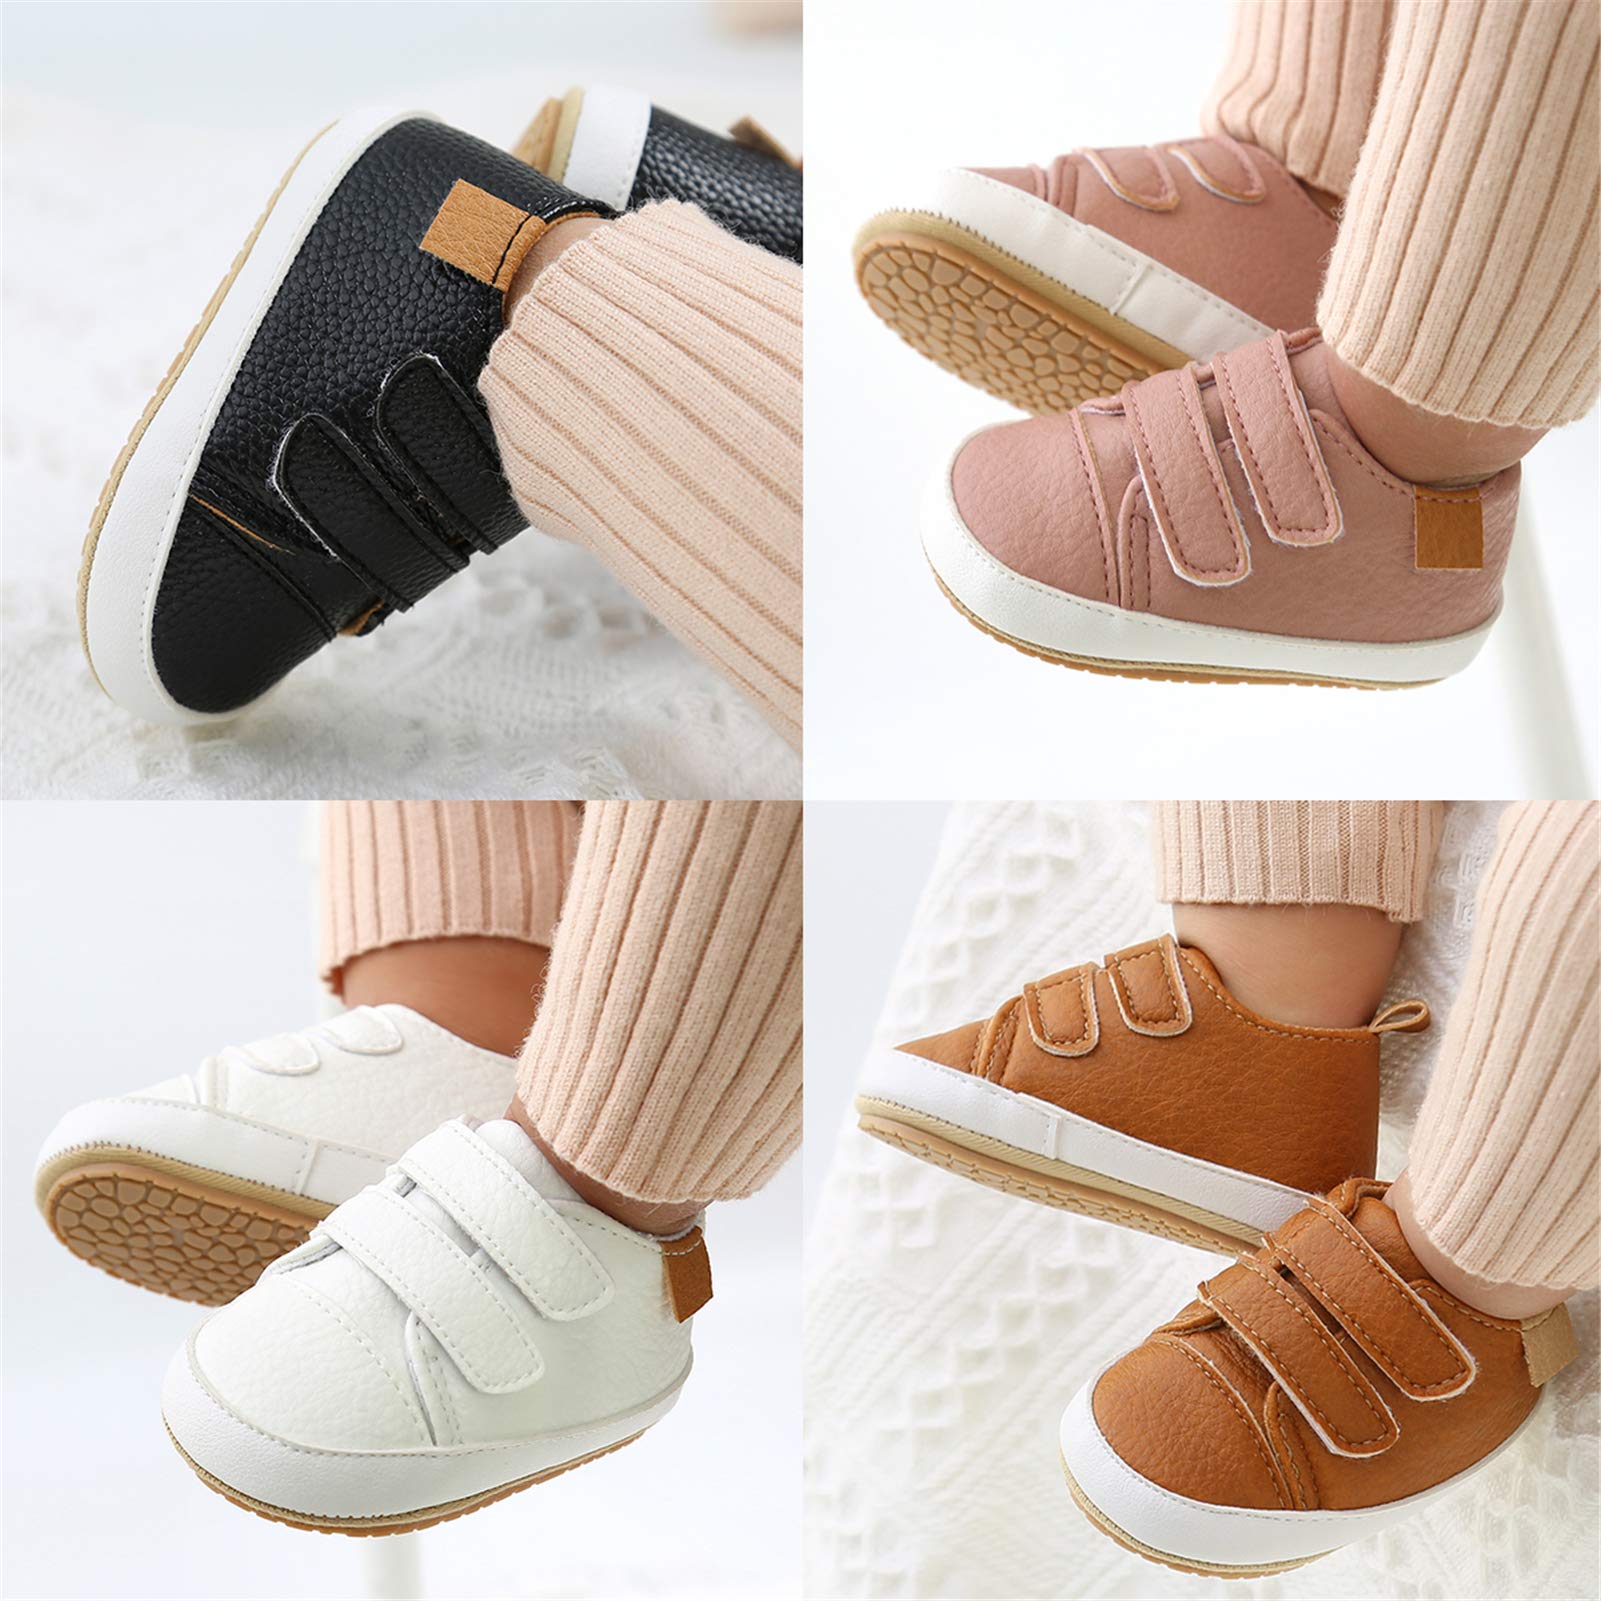 RVROVIC Baby Boys Girls Anti-Slip Sneakers Soft Ankle Boots Toddler First Walkers Newborn Crib Shoes